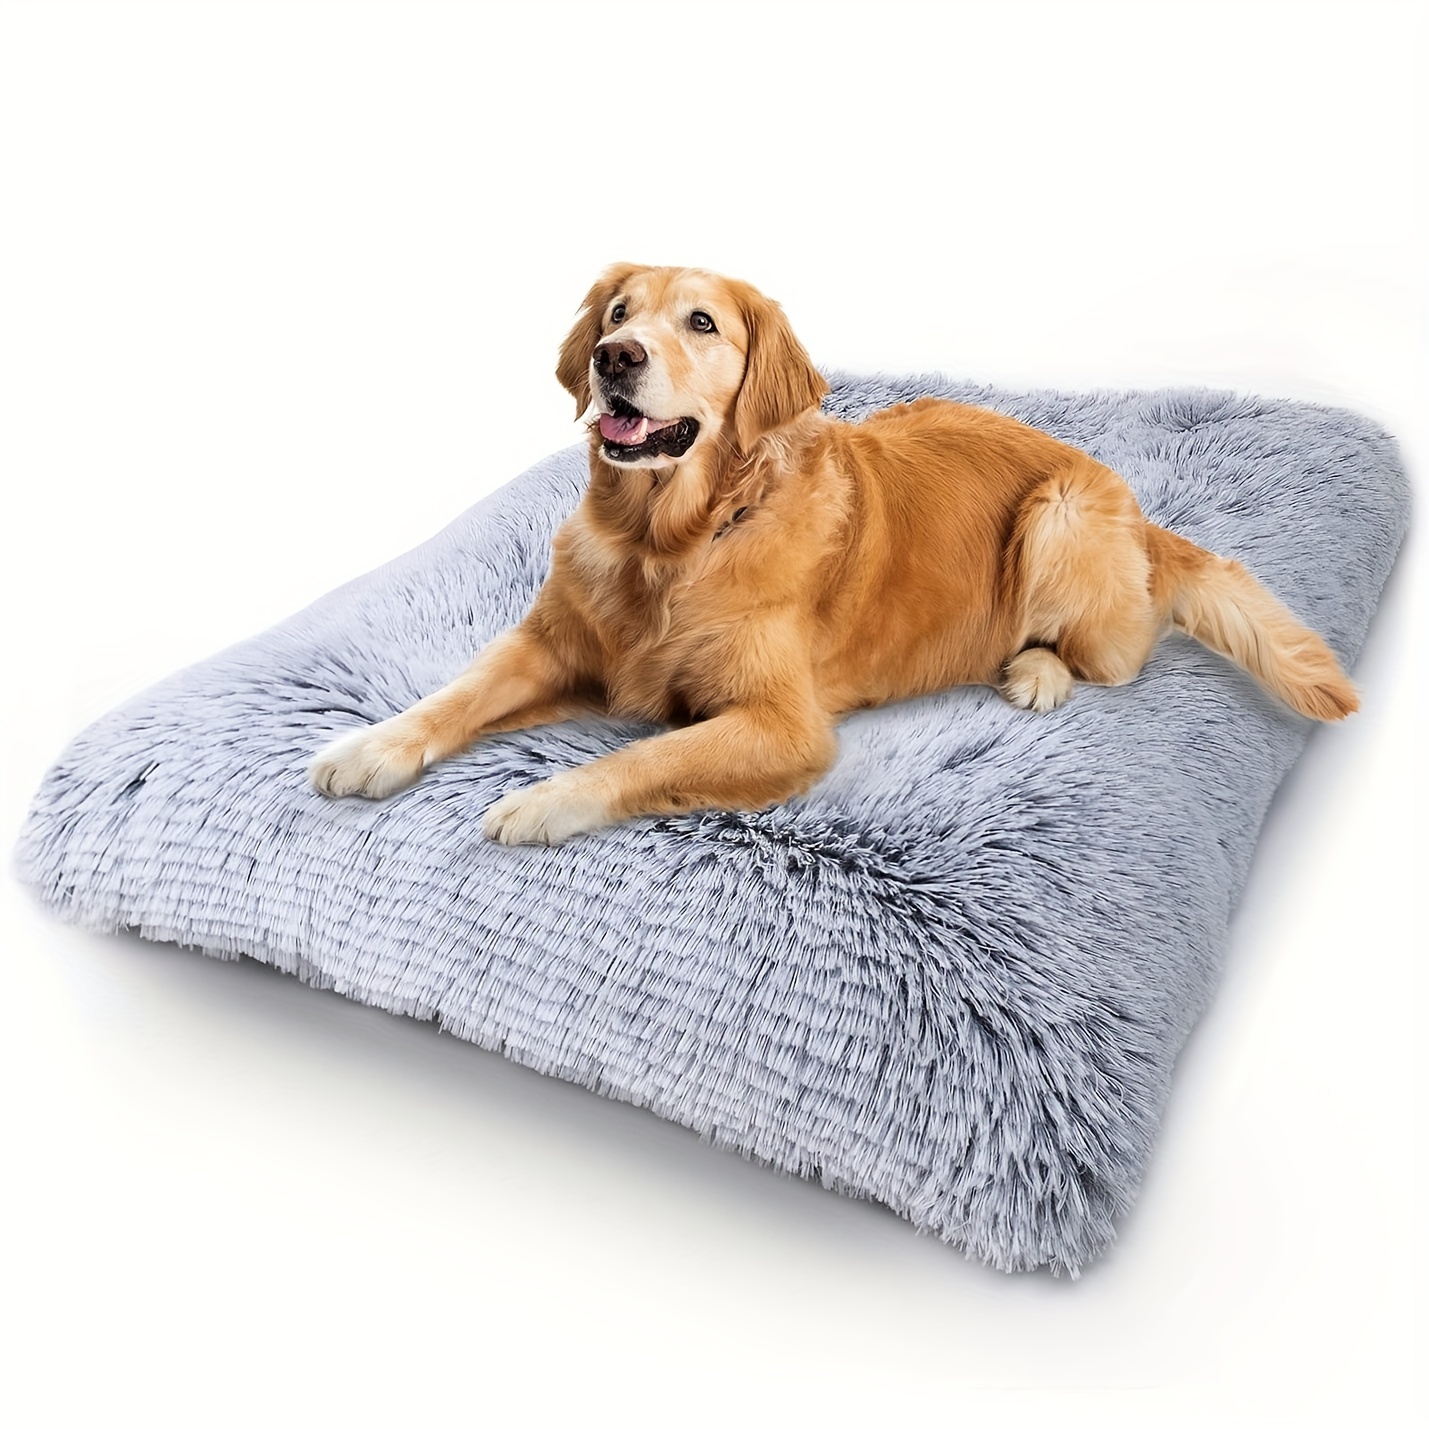 Veki Washable Dog Bed for Medium Small Dogs Cats Soft Dog Crate